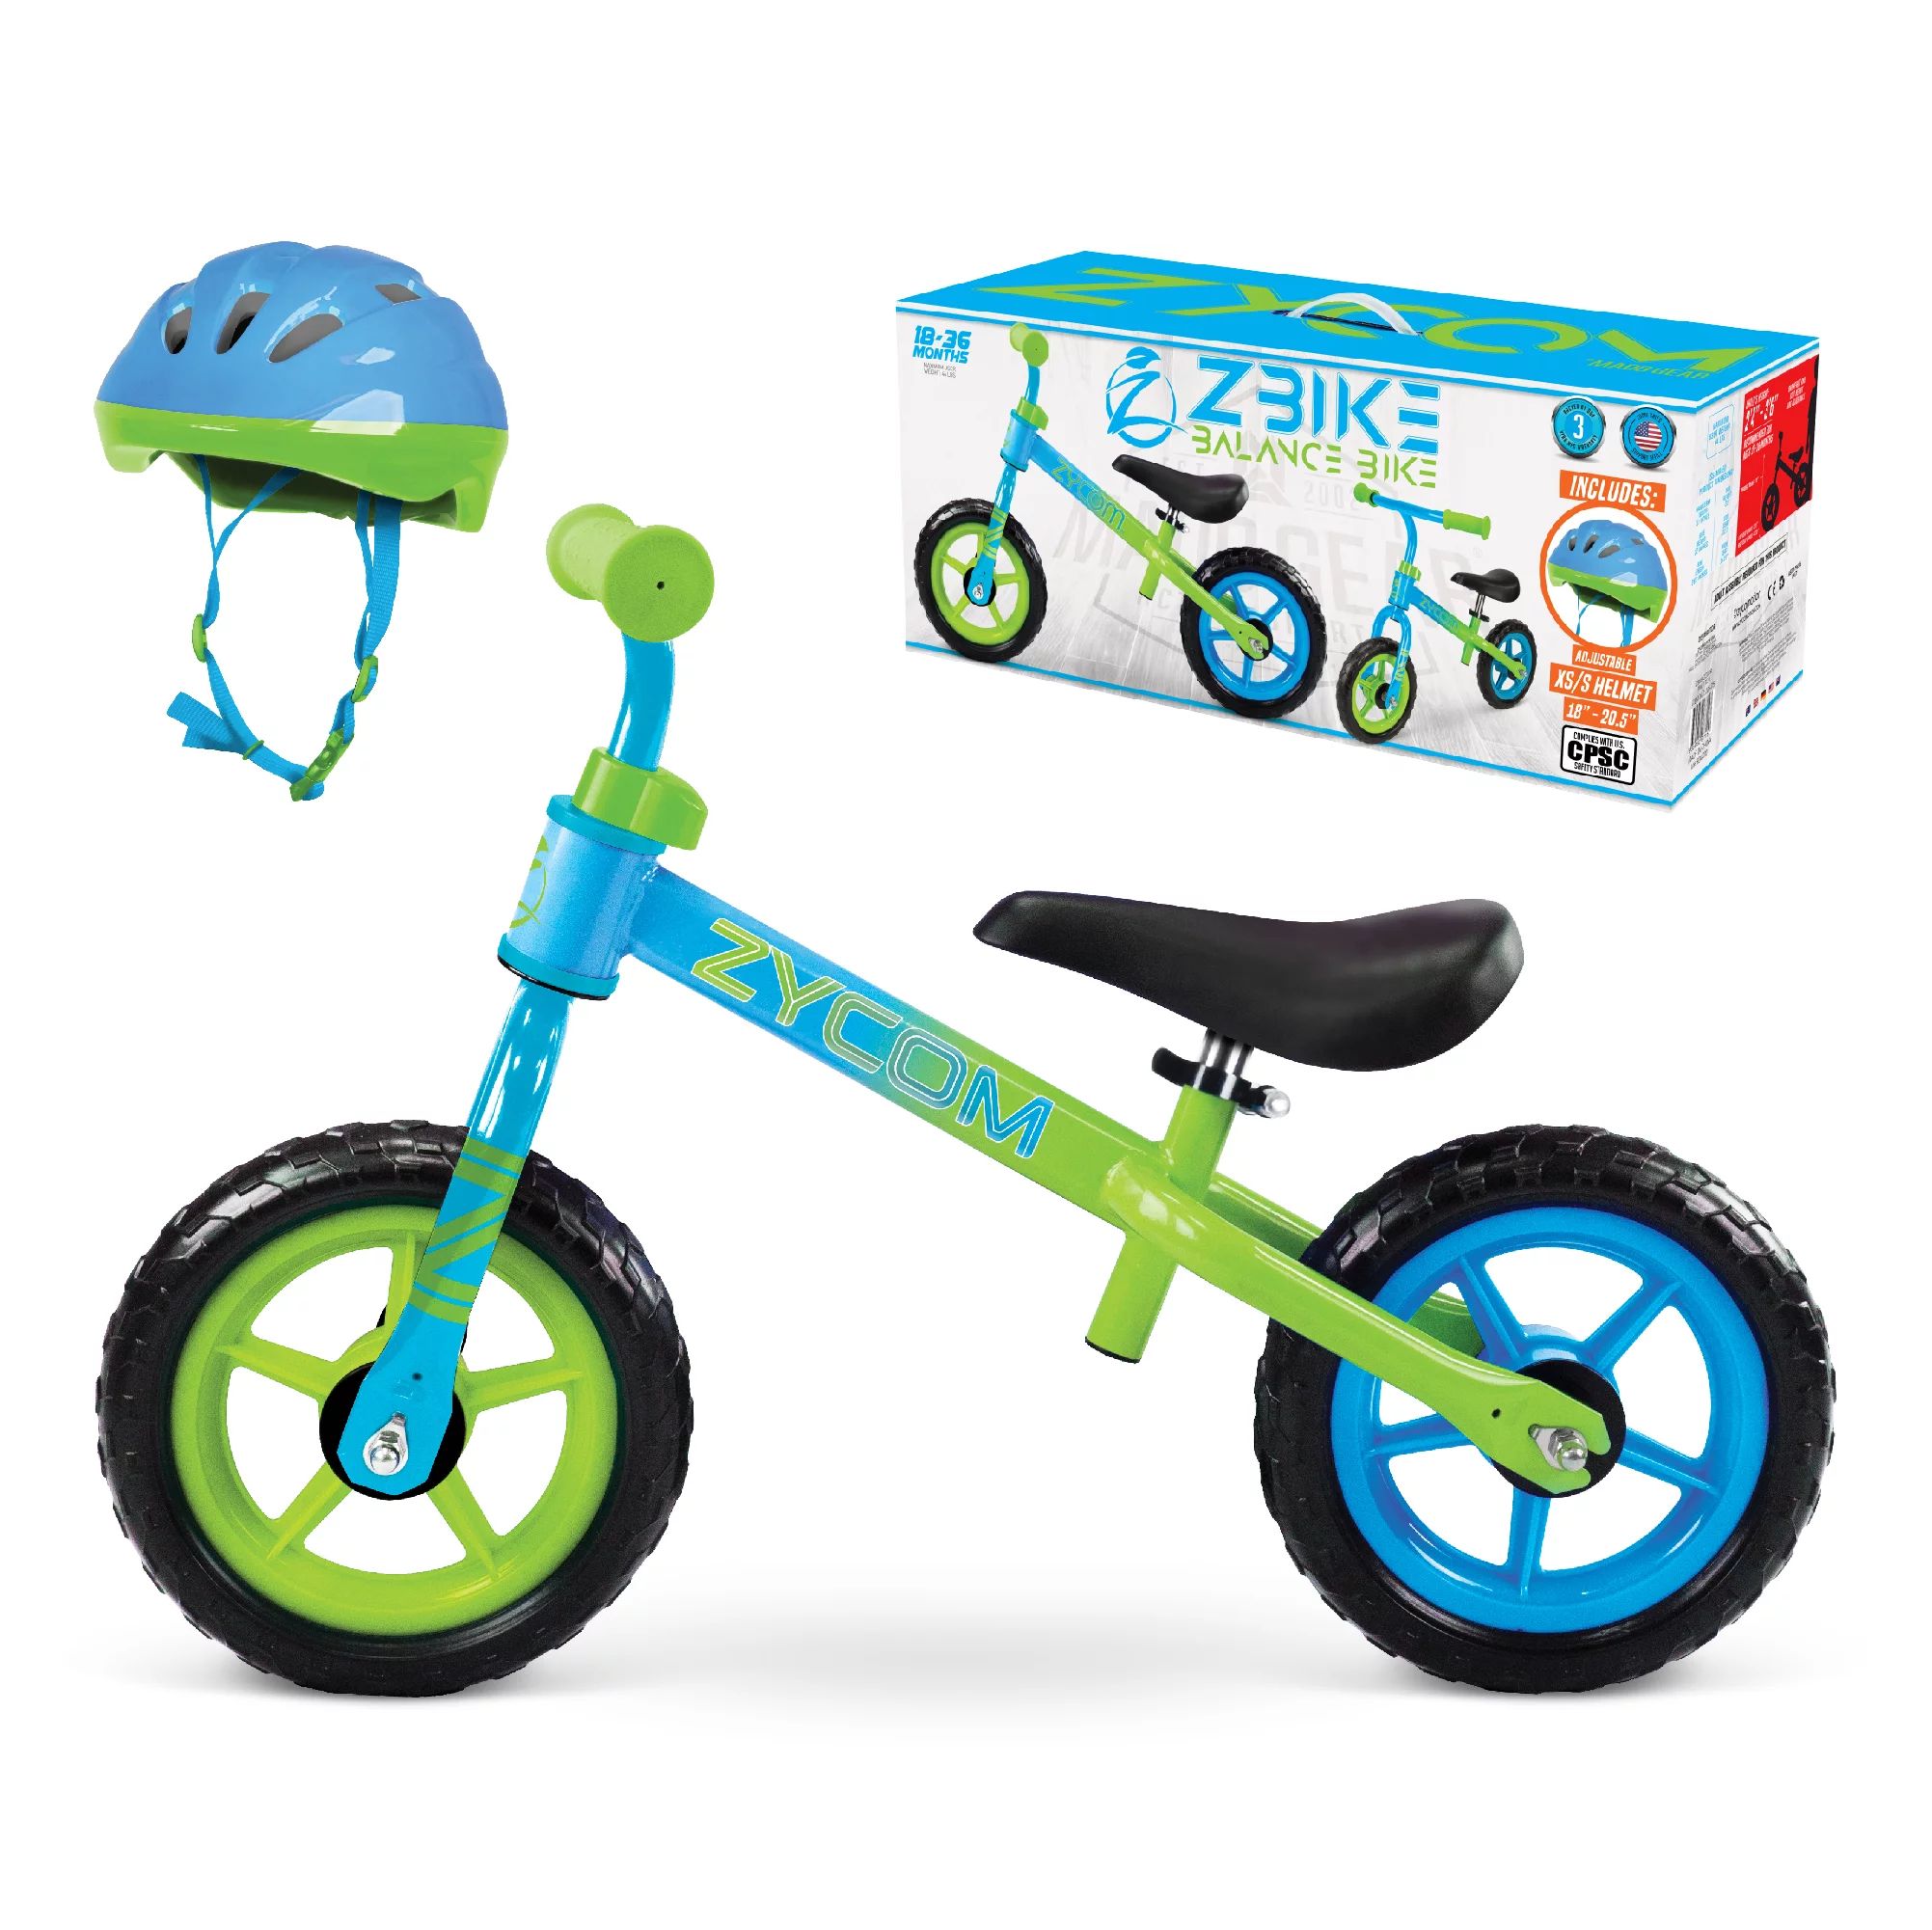 Zycom ZBike Toddlers Balance Bike and Adjustable Helmet Combo – Blue/Green - Suits Ages 18 – ... | Walmart (US)